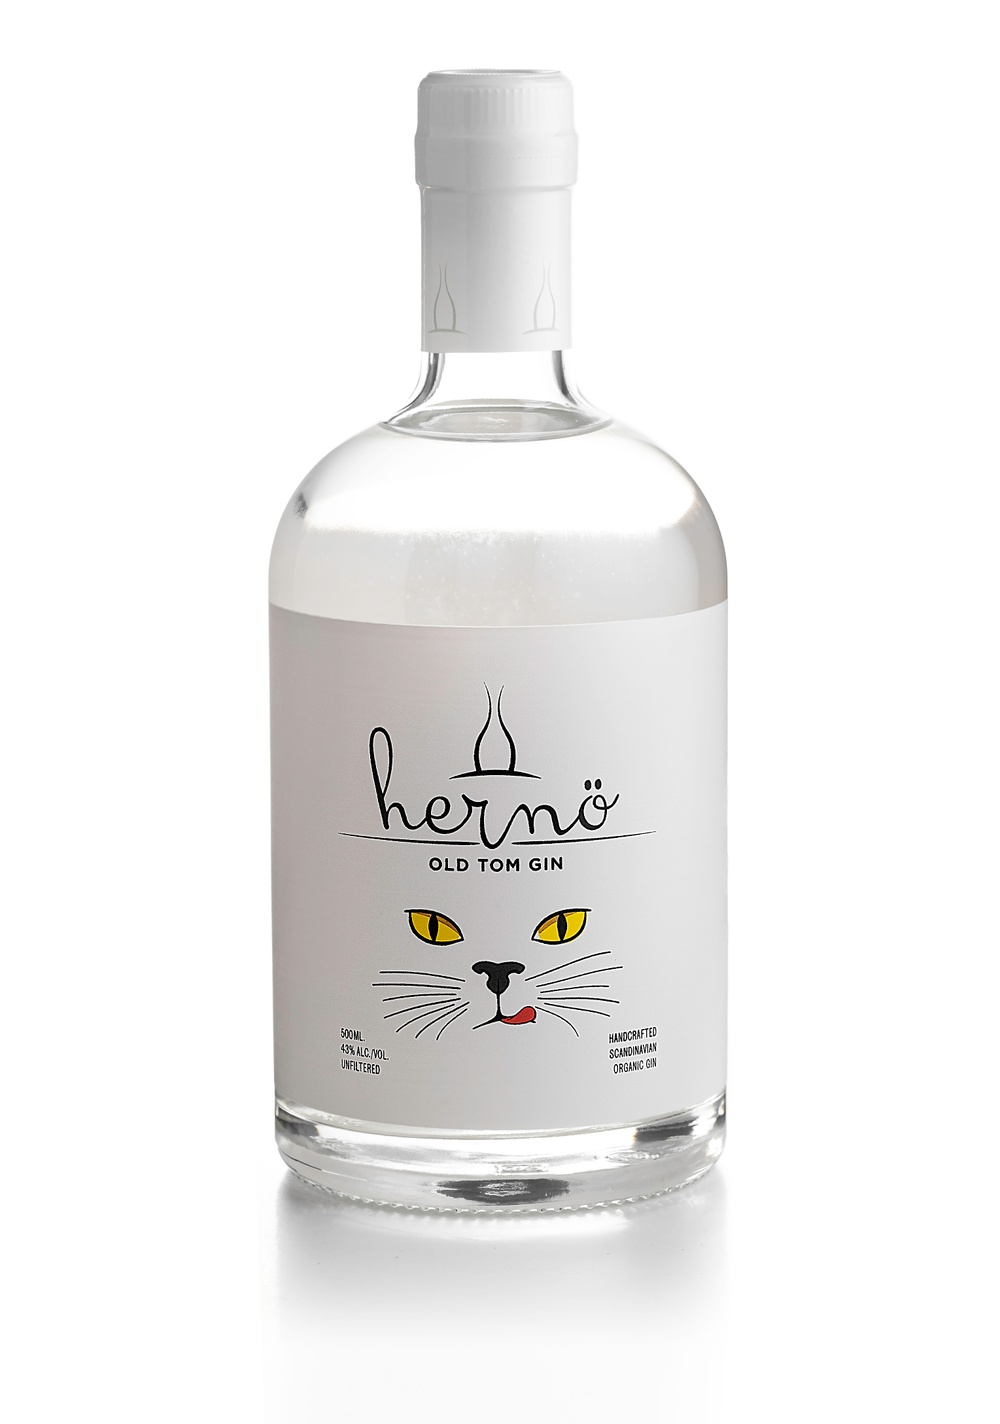 Hernö Old Tom Gin is made from the same distilled gin as Hernö Gin, but with an extra amount of Meadowsweet added in the distillation and after diluting it down to 43% we add a touch of sugar. The sweetening lifts the floral notes, releases an array of juniper and makes the gin even smoother.